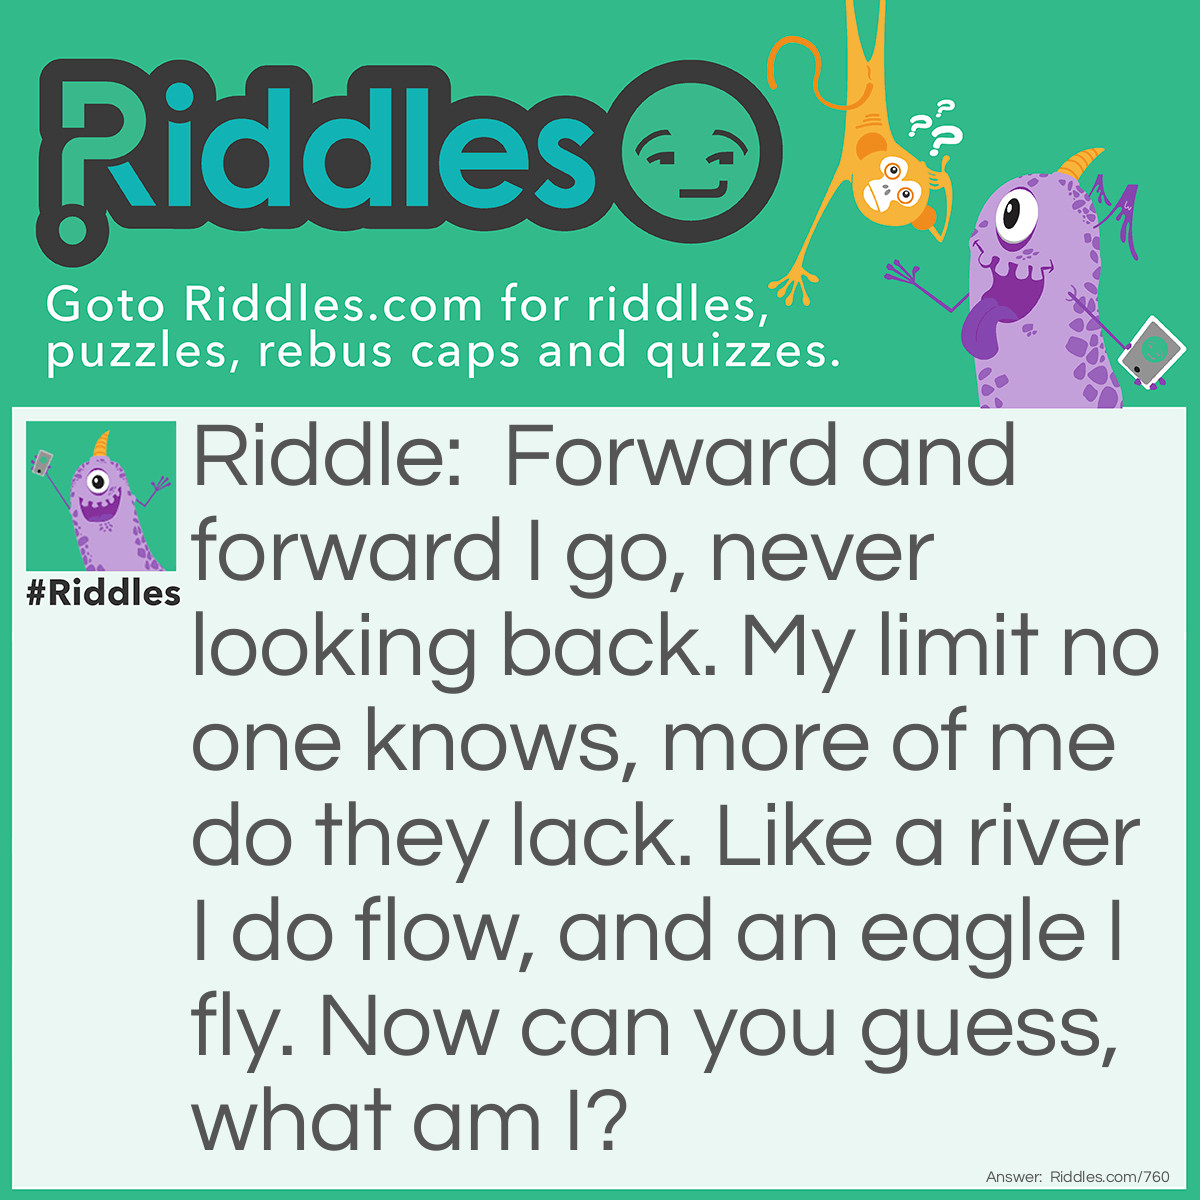 Riddle: Forward and forward I go, never looking back. My limit no one knows, more of me do they lack. Like a river I do flow, and an eagle I fly. Now can you guess, what am I? Answer: Time. I am time!